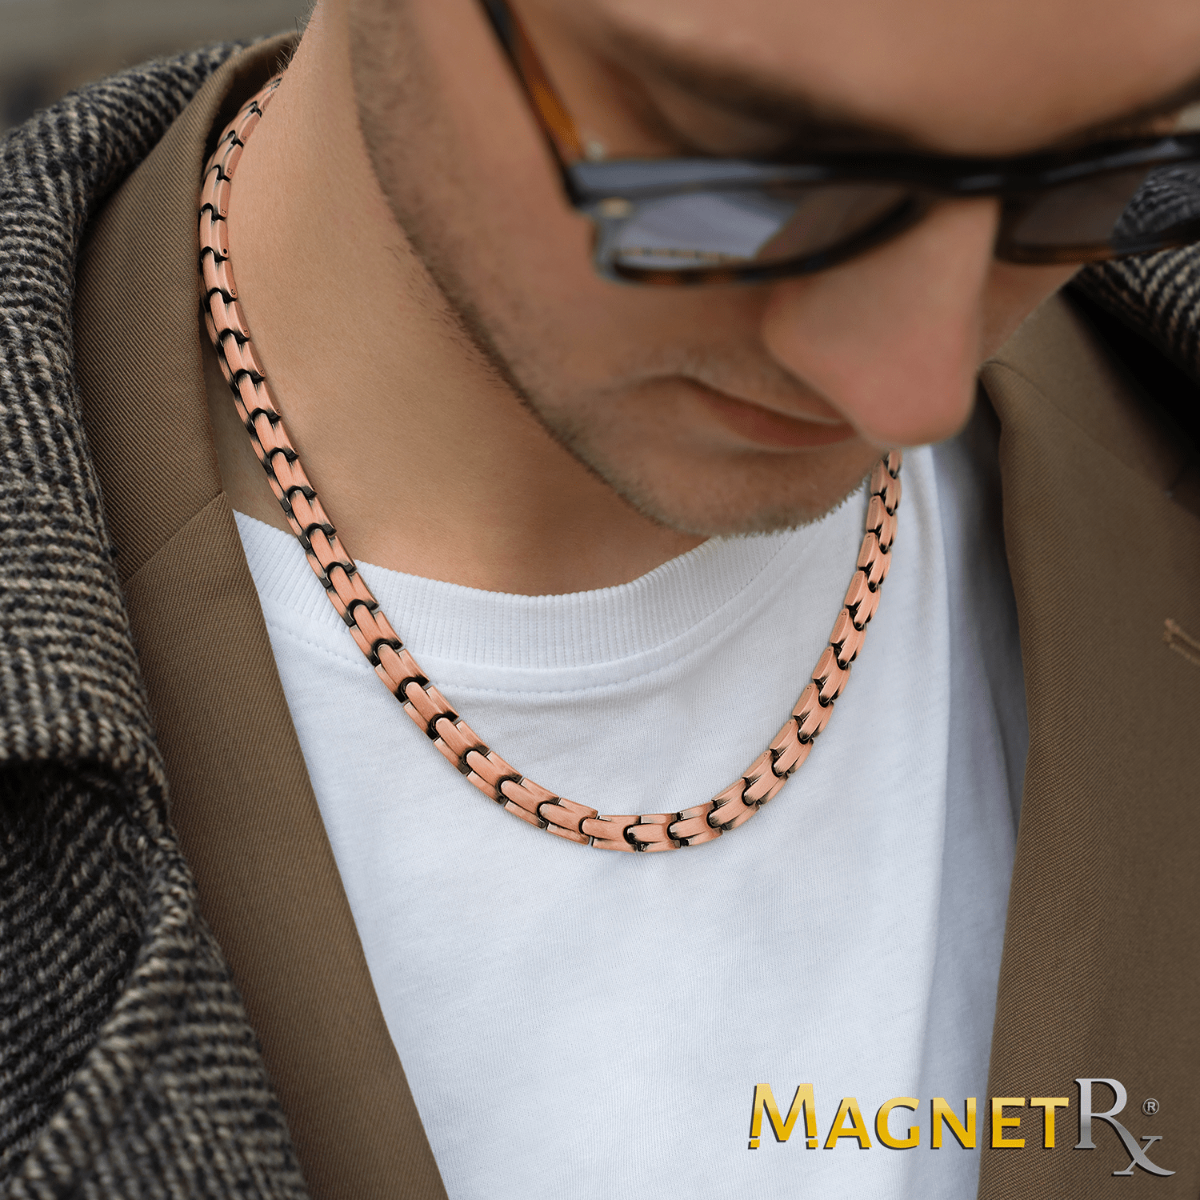 Copper Necklace with Powerful Magnetic Therapy Necklace Chain